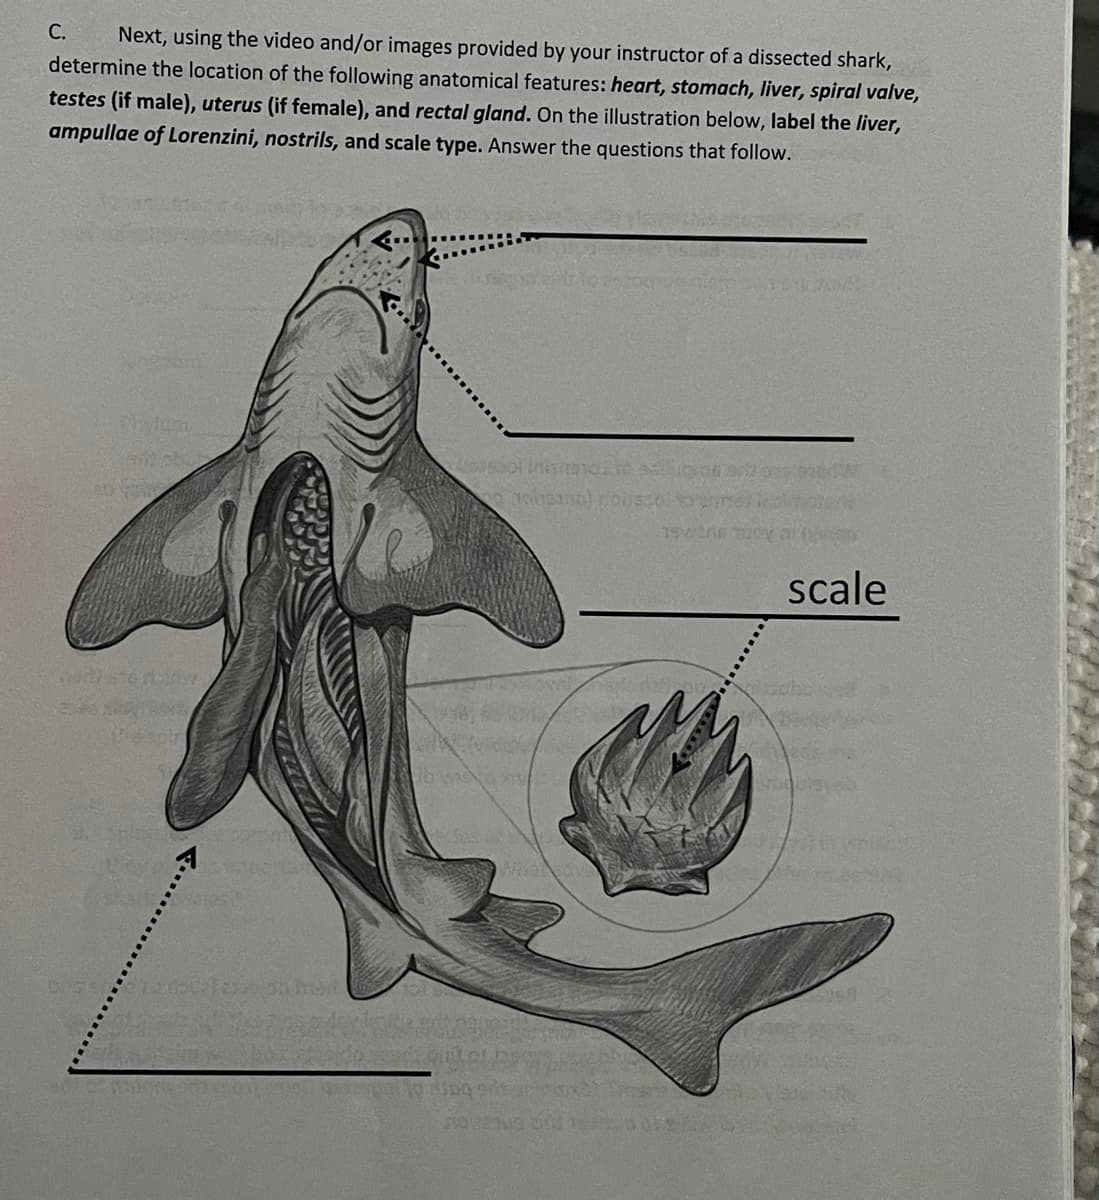 С.
Next, using the video and/or images provided by your instructor of a dissected shark,
determine the location of the following anatomical features: heart, stomach, liver, spiral valve,
testes (if male), uterus (if female), and rectal gland. On the illustration below, label the liver,
ampullae of Lorenzini, nostrils, and scale type. Answer the questions that follow.
lun
scale
